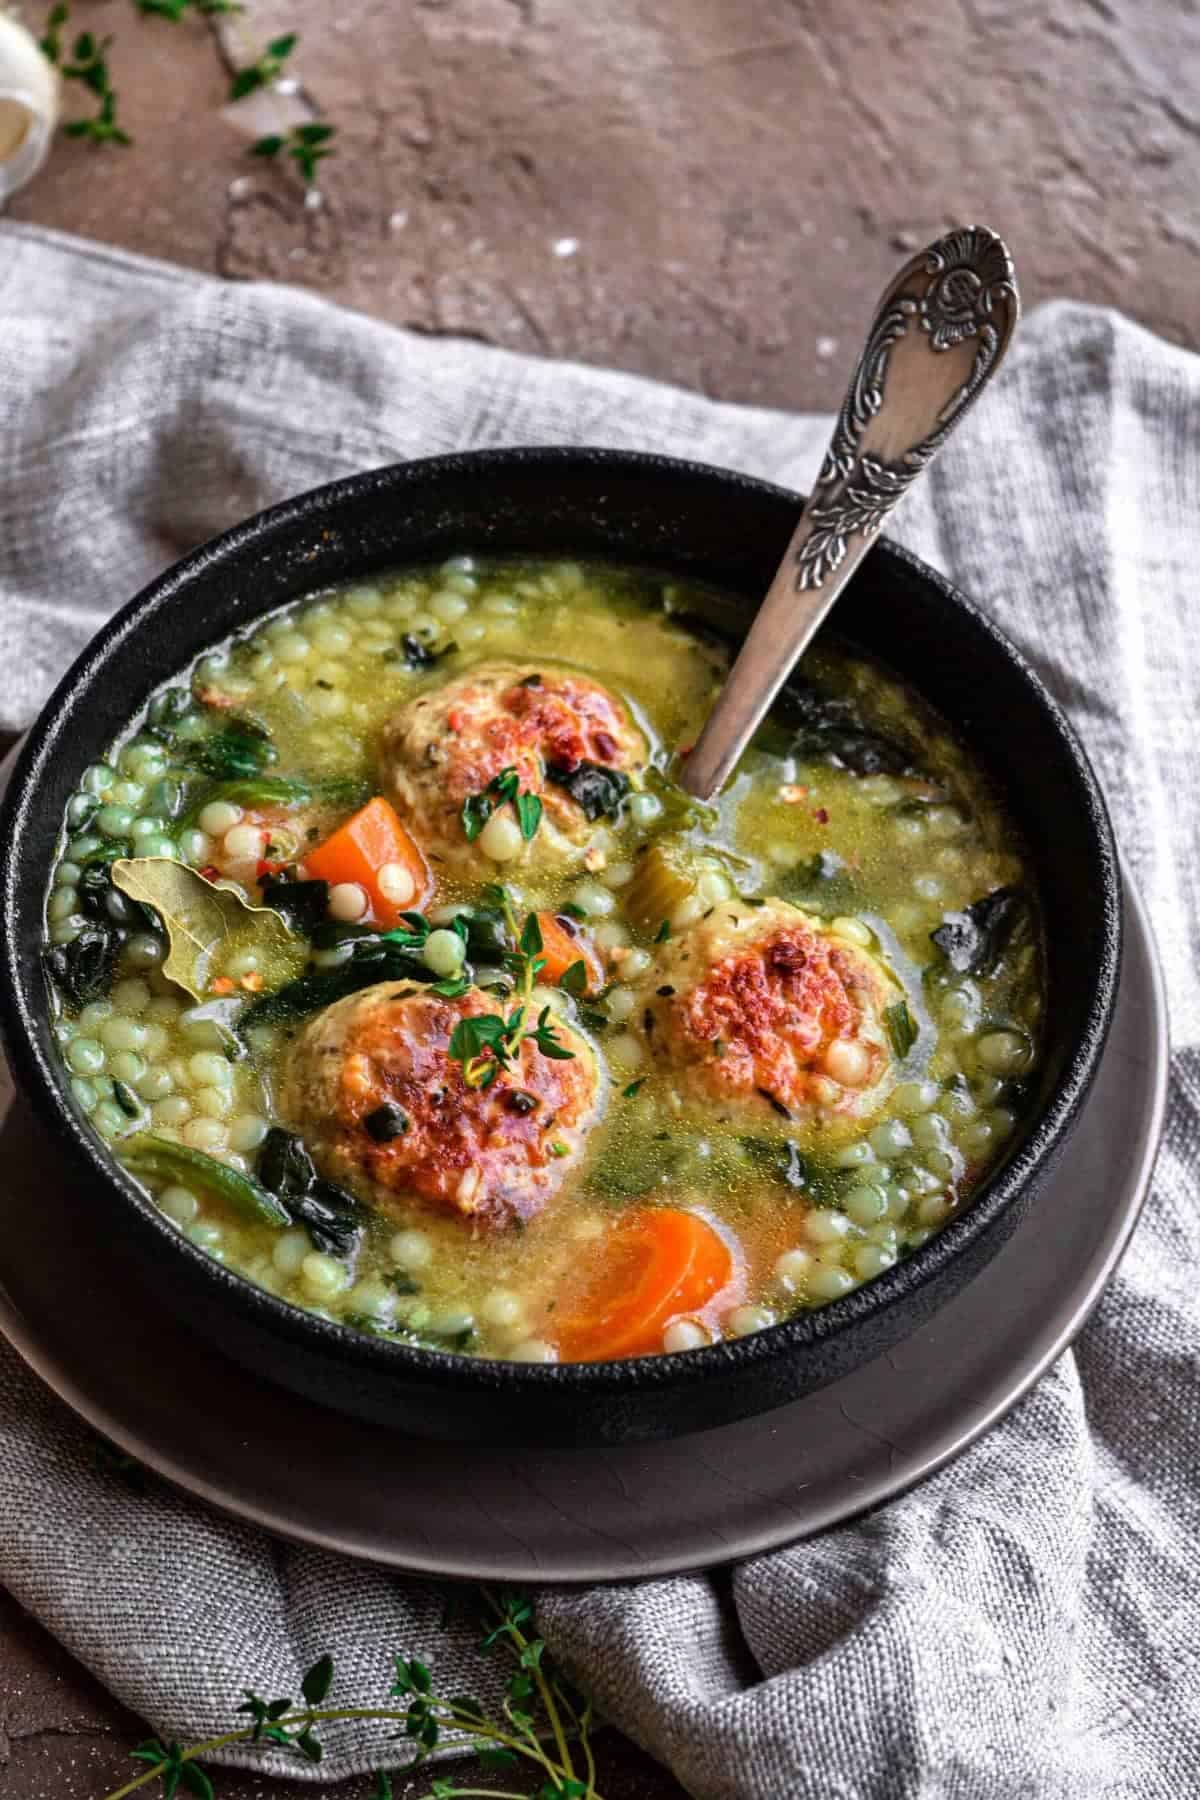 Italian Wedding Soup with chicken meatballs in a black bowl